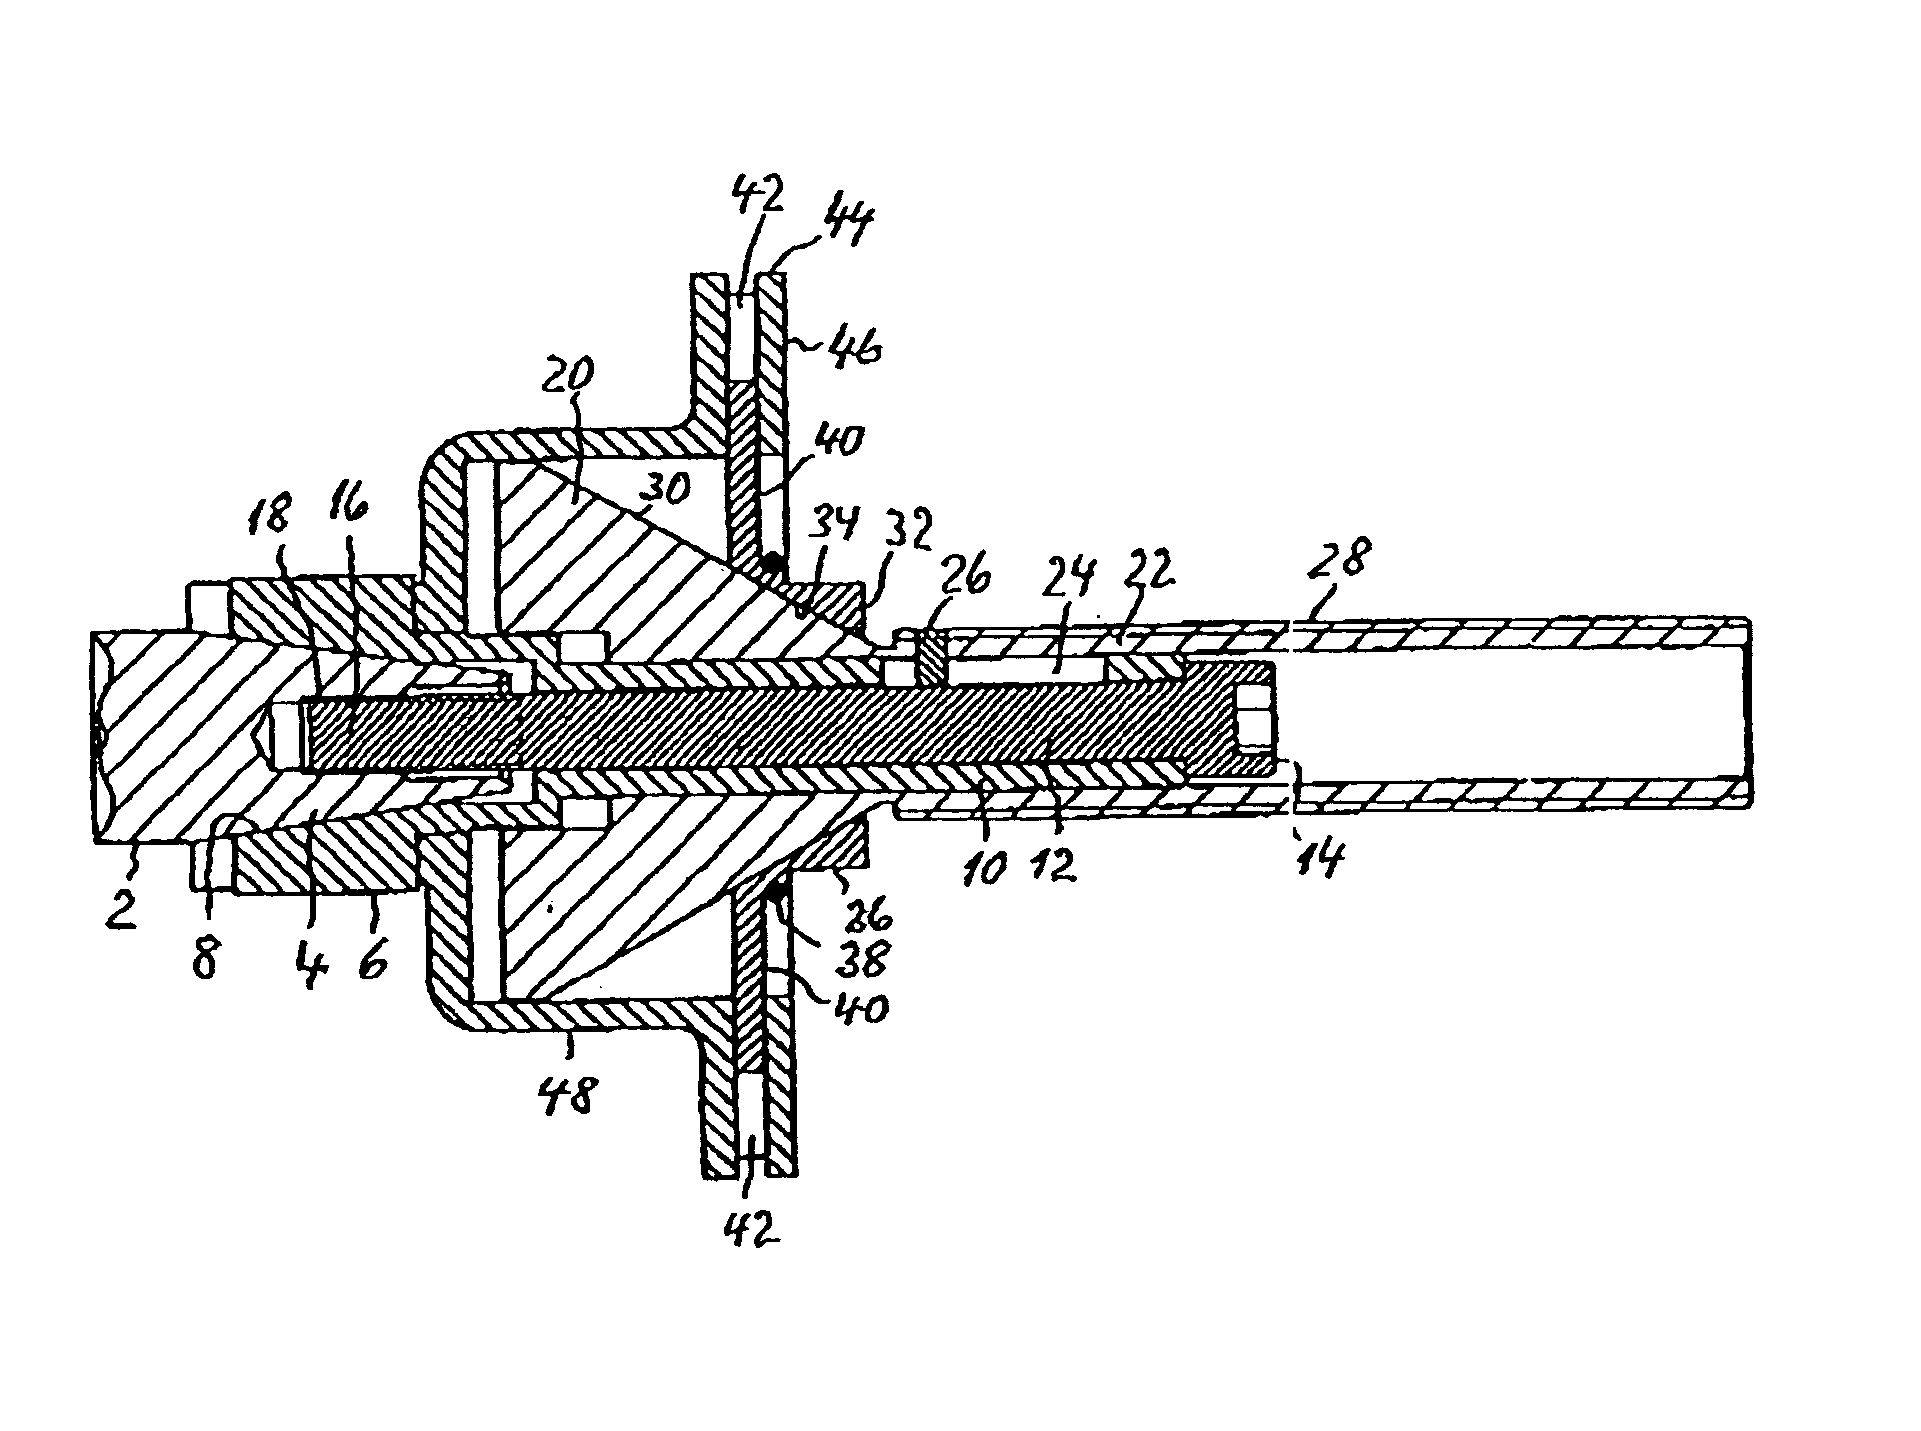 Quick-clamping device with hub centering ring for securing a vehicle wheel on the shaft of wheel-balancing machines